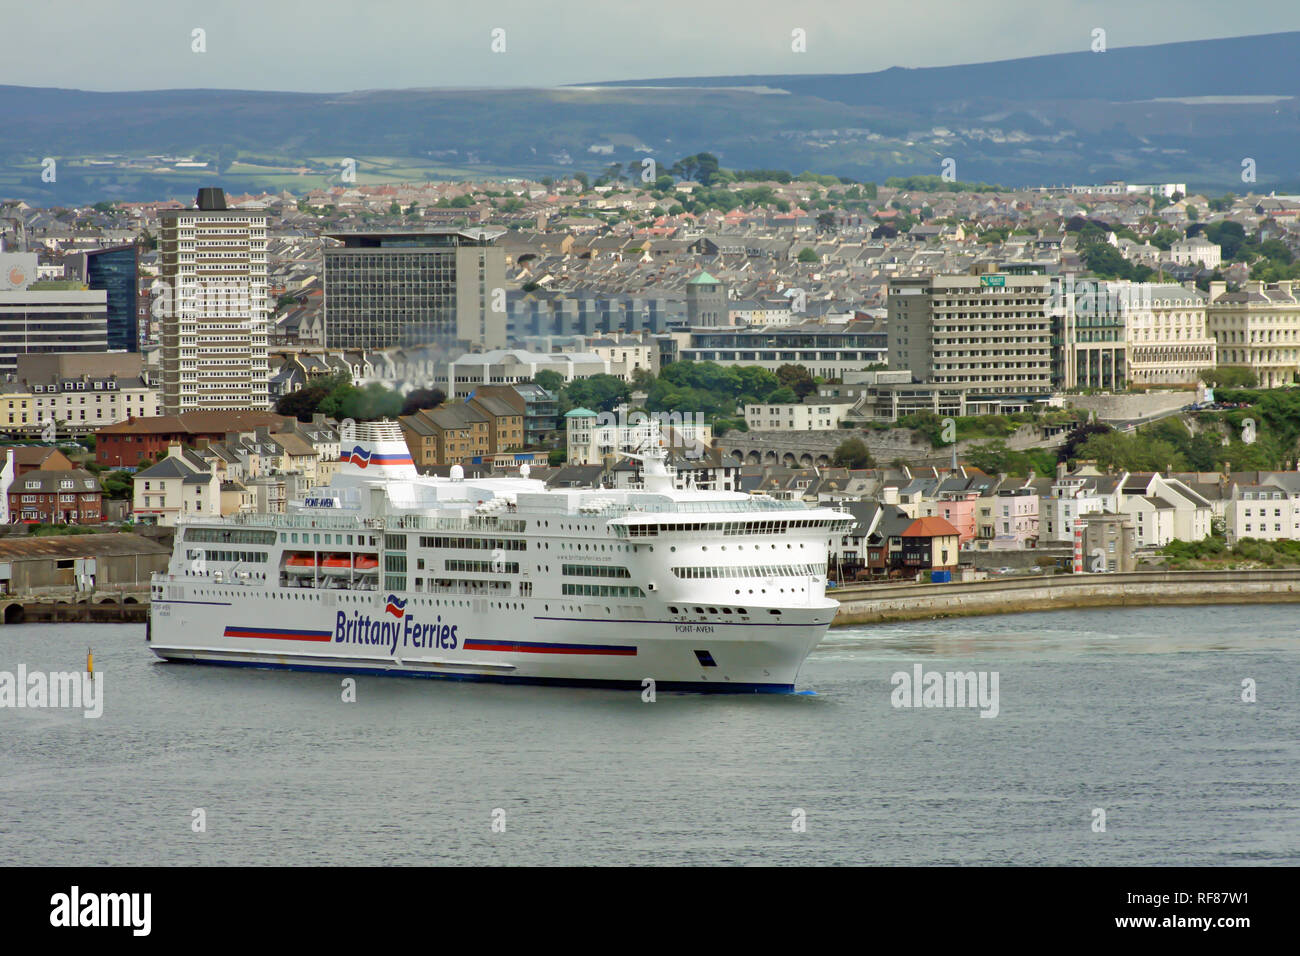 Brittany Ferries cross channel ferries; Passenger and frieght; Stock Photo